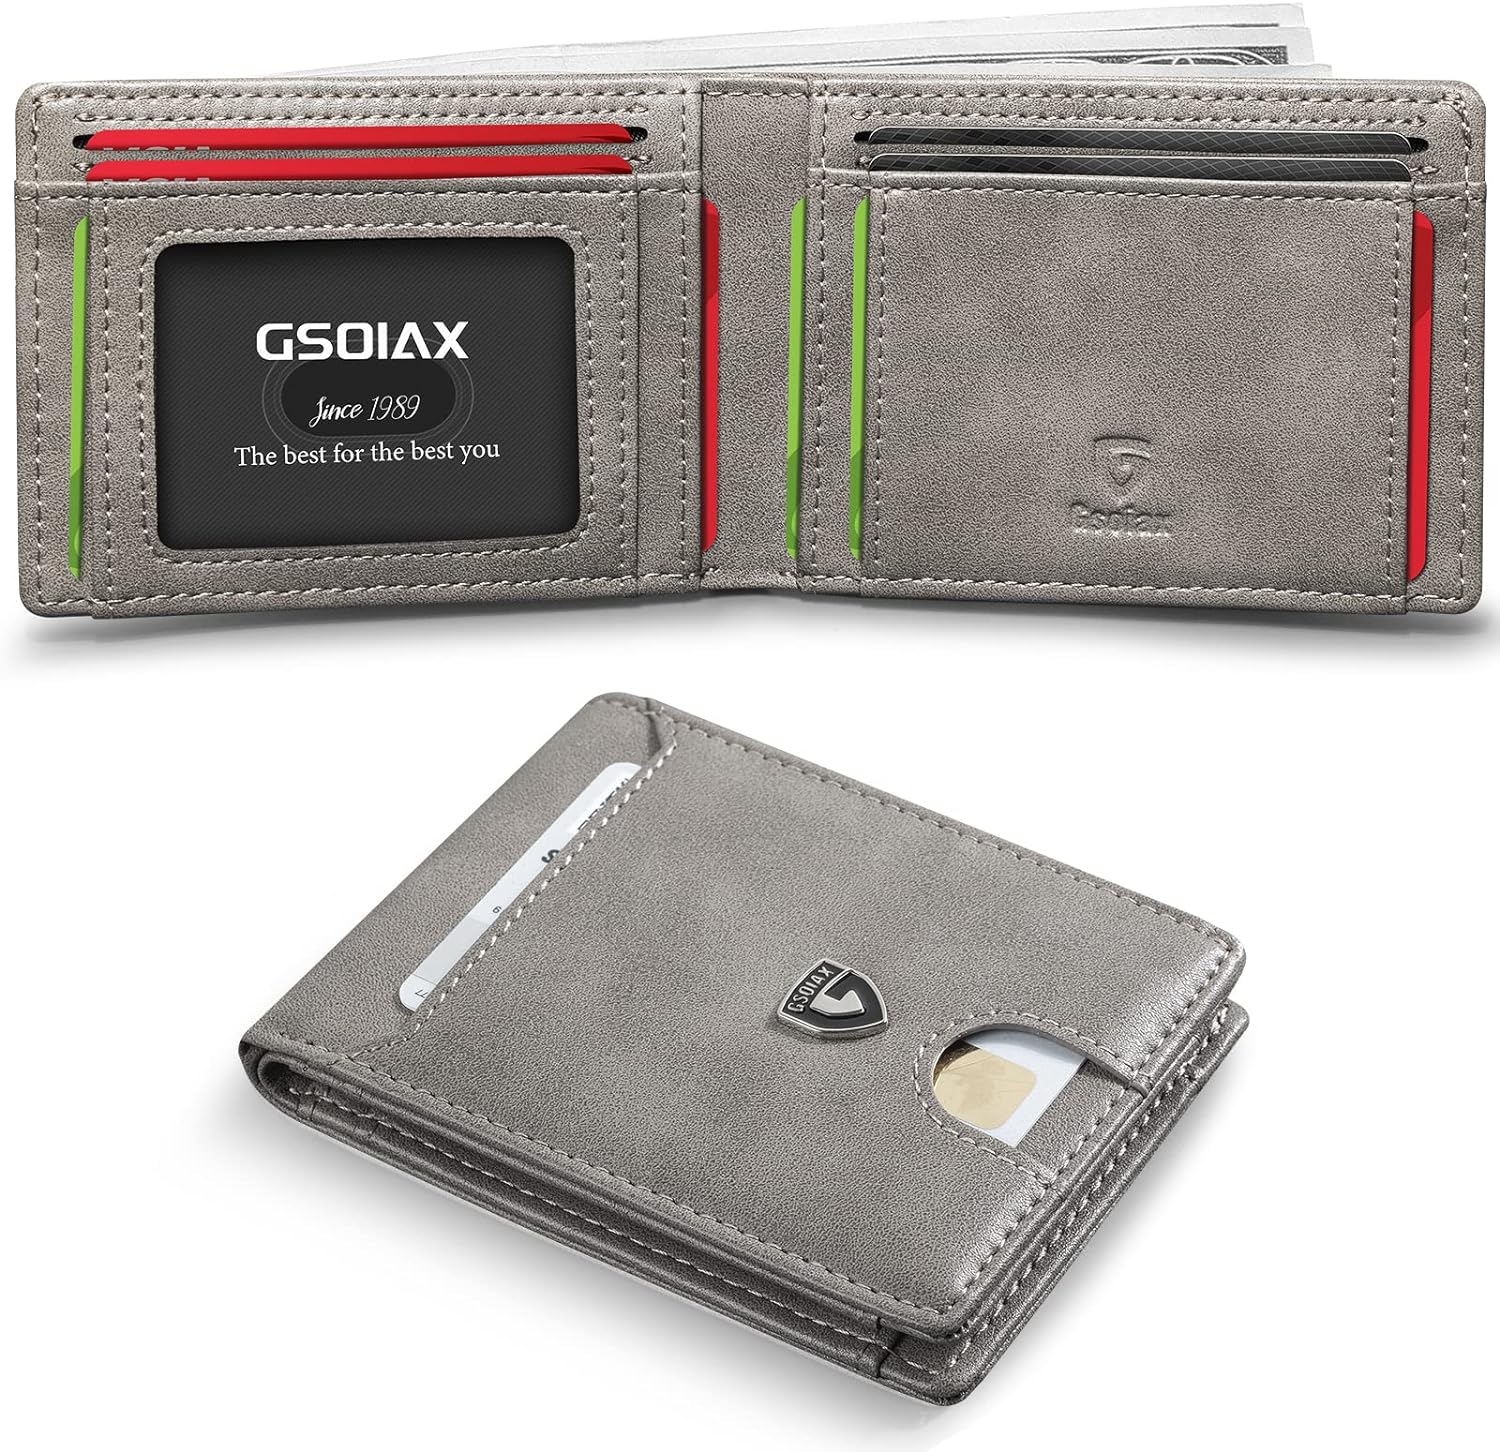 Men's RFID Blocking Slim Bifold Wallet in Genuine Leather with Money Clip and Gift Box